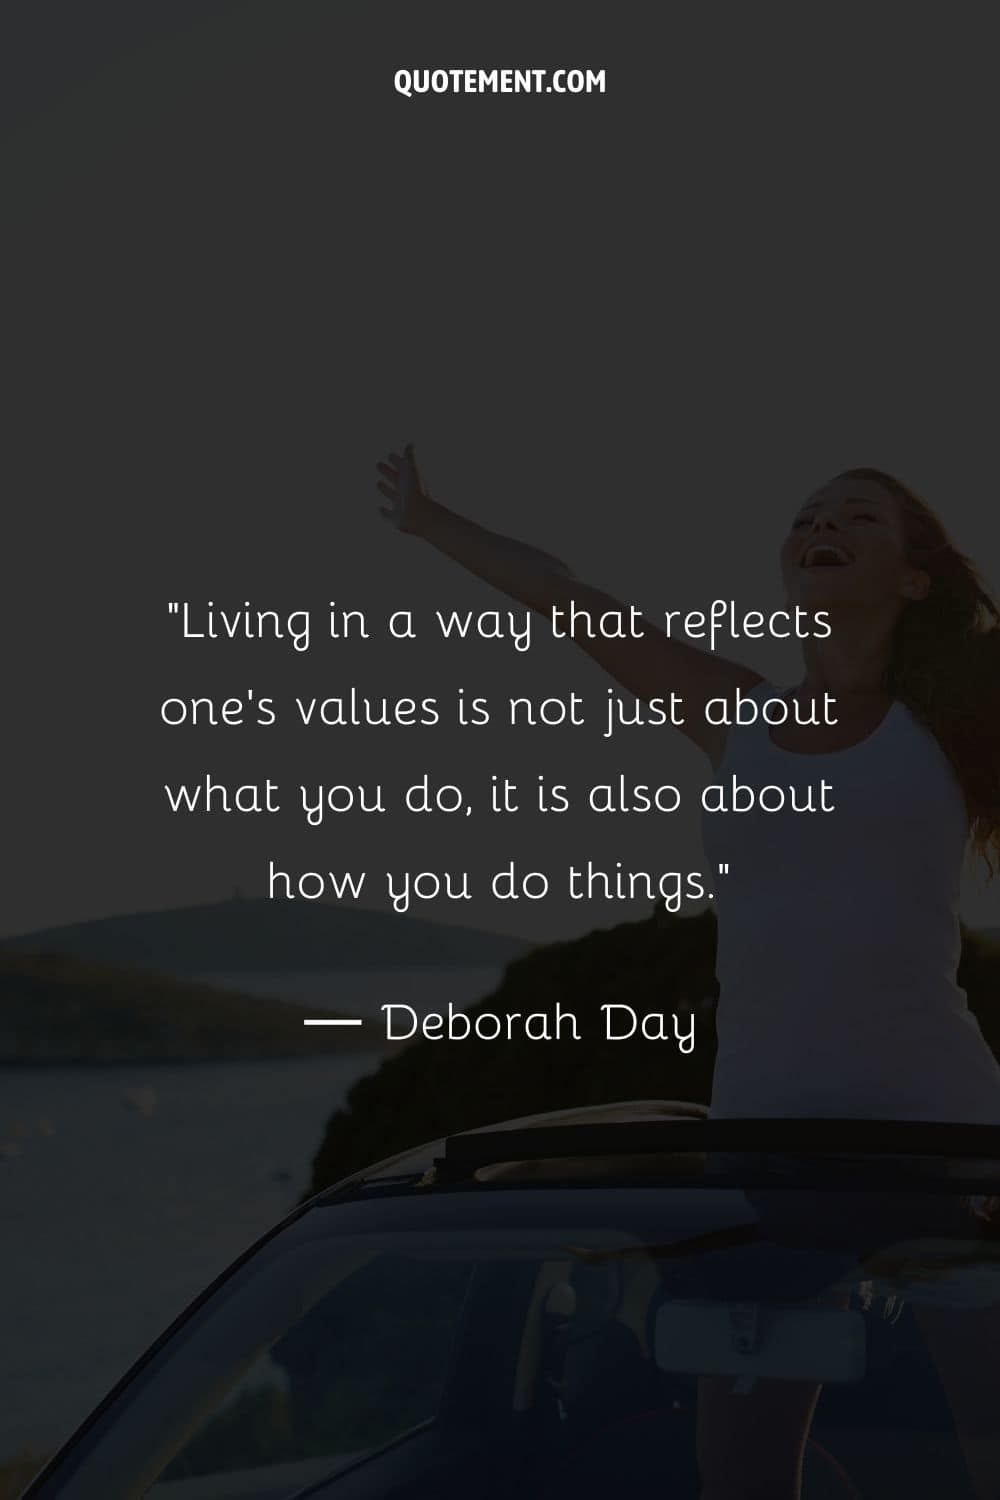 Living in a way that reflects one's values is not just about what you do, it is also about how you do things